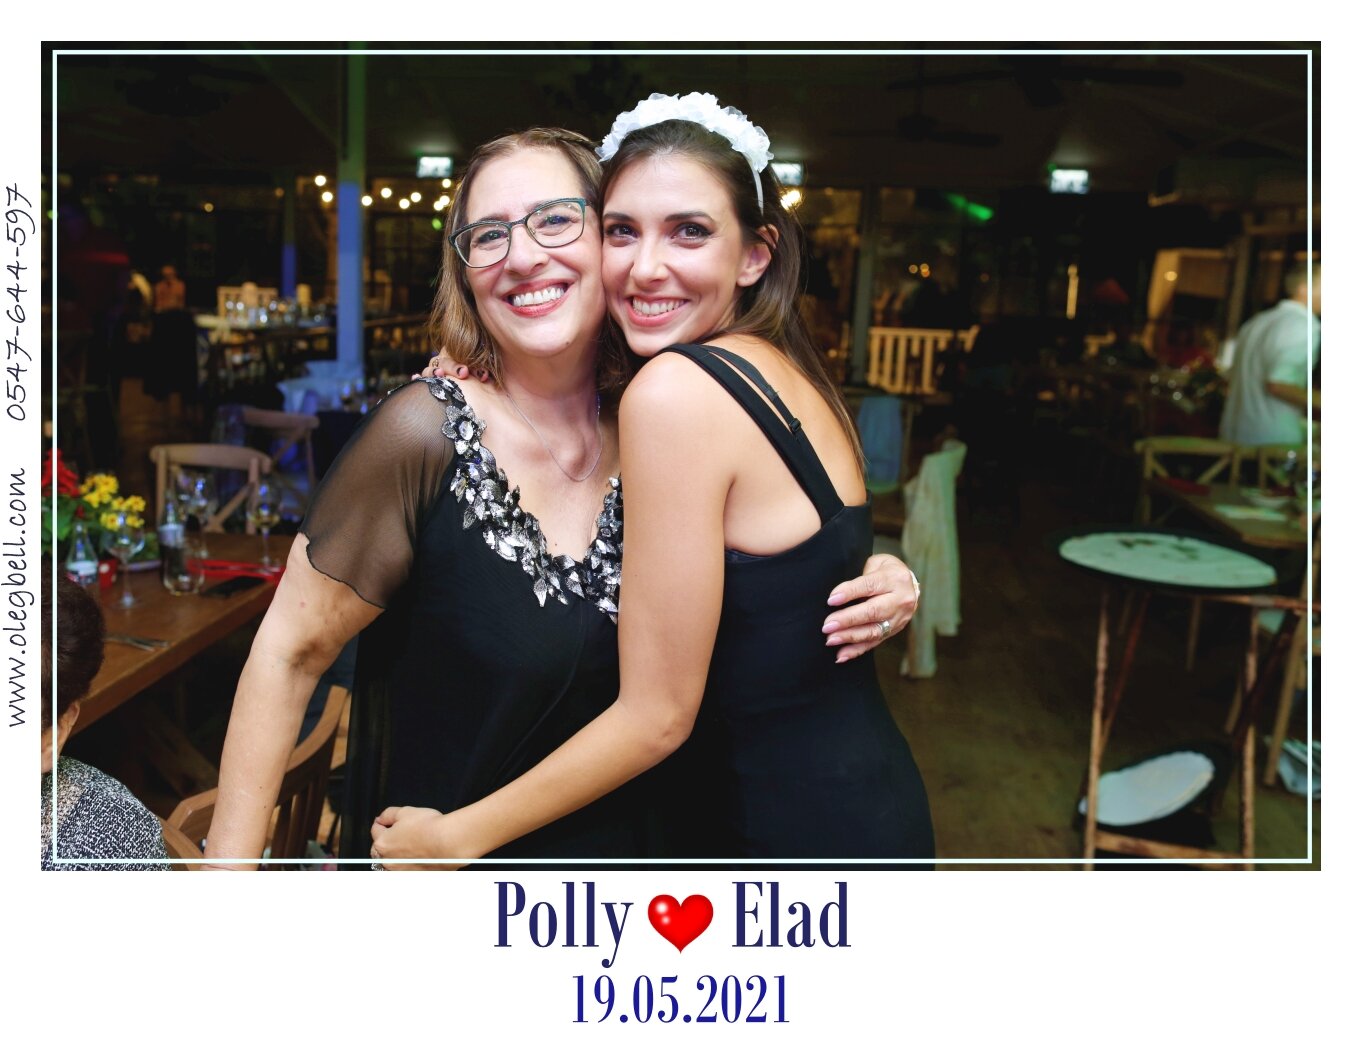 POLLY_AND_ELAD_WD_MG_SITE_035.JPG